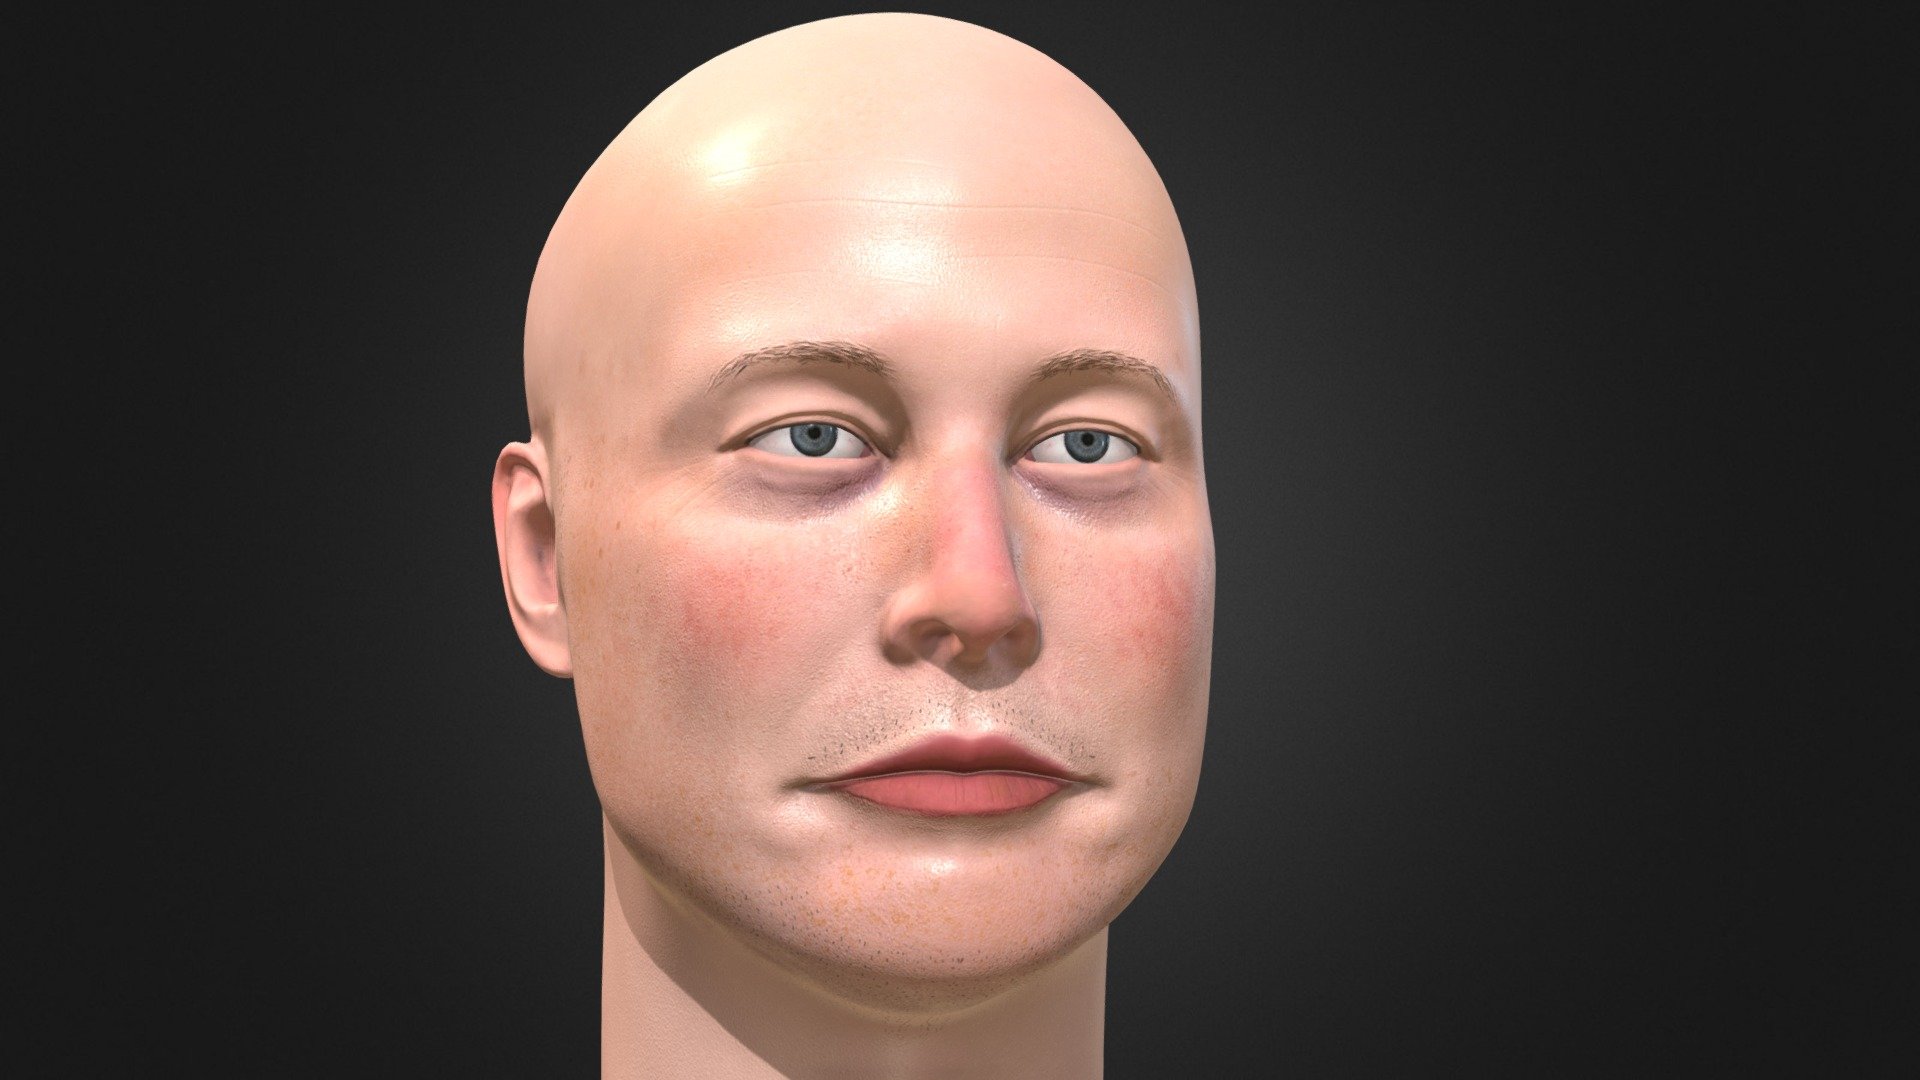 Portrait of Elon Musk. Topology is ready for rigging. Two LOD's are included. Low poly head with 2806 polygons and higher poly head with 9269 polygons. Cycles renders you see are made with 9 K head. 
Textures are 4K. They are PBR and created with game engine performance in mind. So this model can easily be added to body mesh and used in game engines.

Included in pack: 
-Blender 2.79b pack. In blender file scene setup with cycles nodes for rendering is included. 
-OBJ files, bout low poly and higher poly. 
-FBX files, bout low poly and higher poly. 
-Textures in 4K.

If you are interested in 3D printable version of my Elon Musk, visit this link: https://sketchfab.com/models/731ccef122a54784842126c30719815e?ref=store_search

Browse my profile to see more of my work. Contact me if you are interested in freelance work 3d model